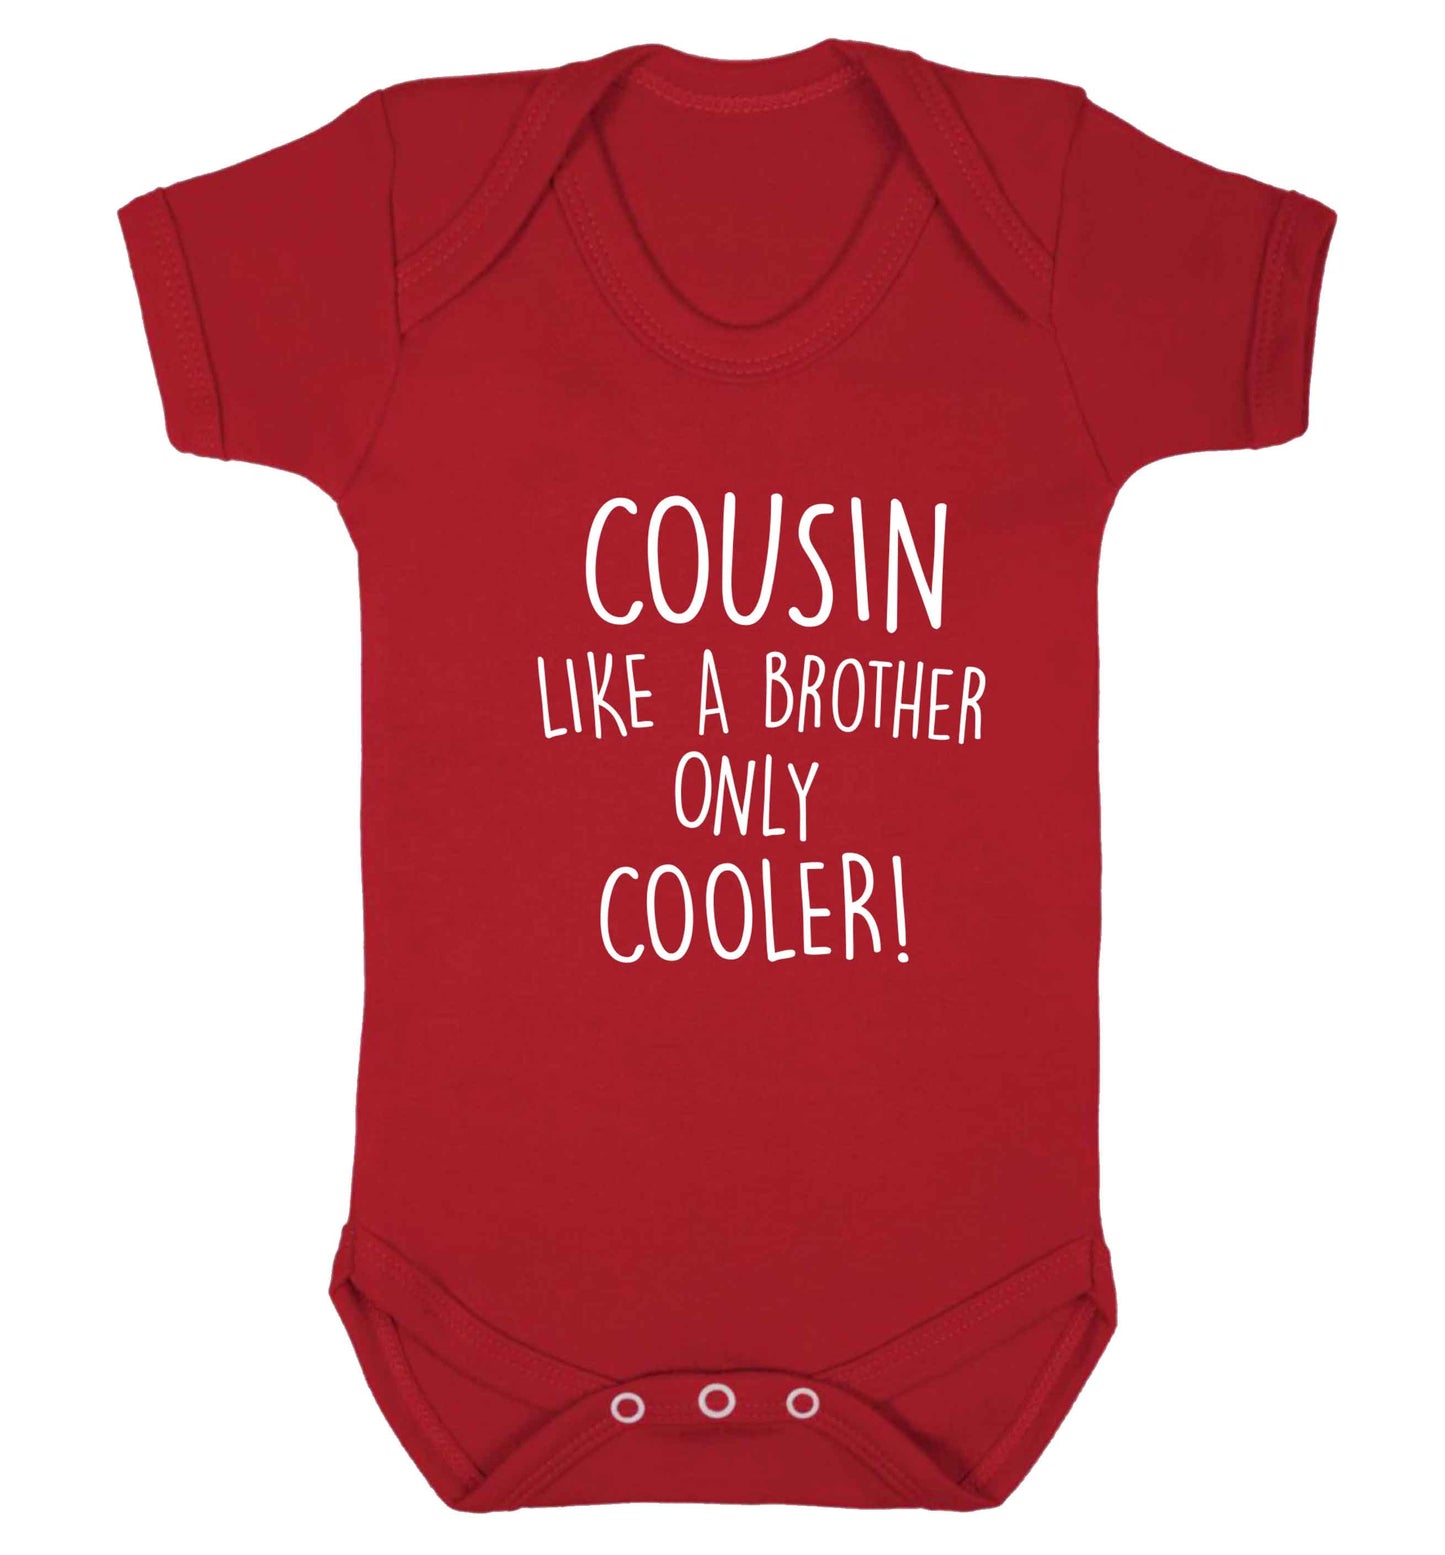 Cousin like a brother only cooler baby vest red 18-24 months